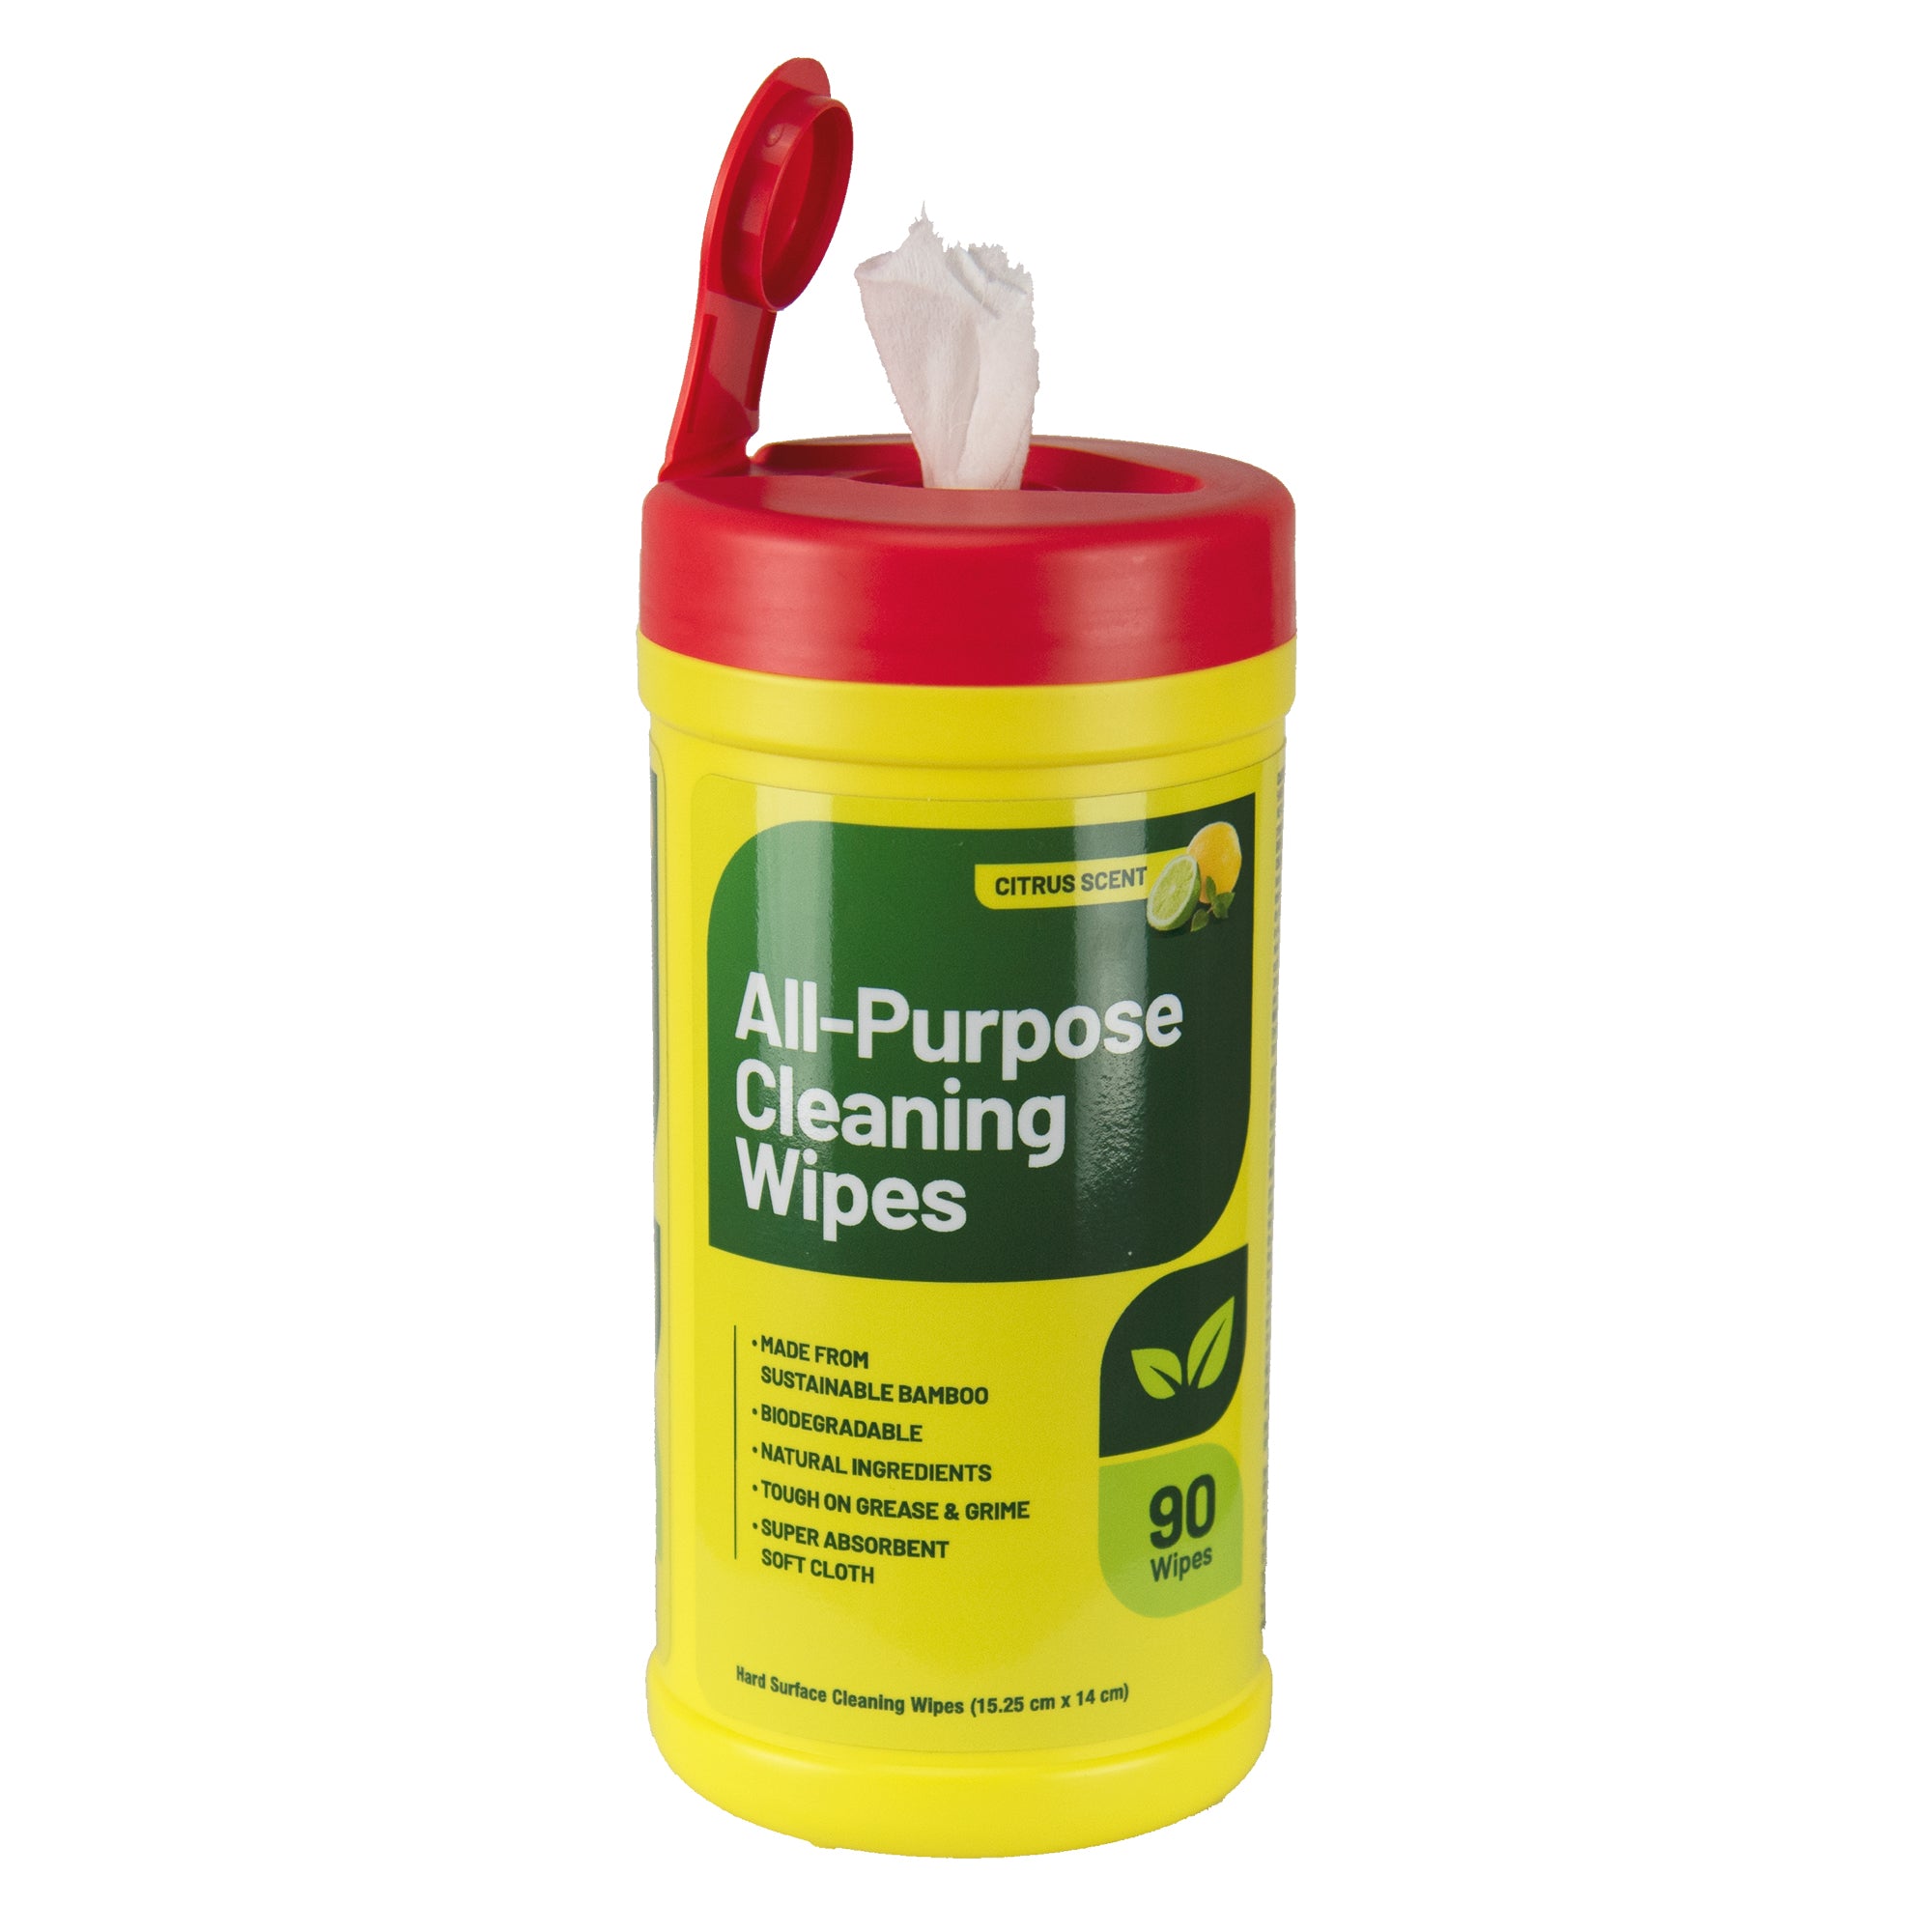 All-Purpose Cleaning Wipes, canister of 90 wipes with the lid open and one wipe sticking out the top on a white background